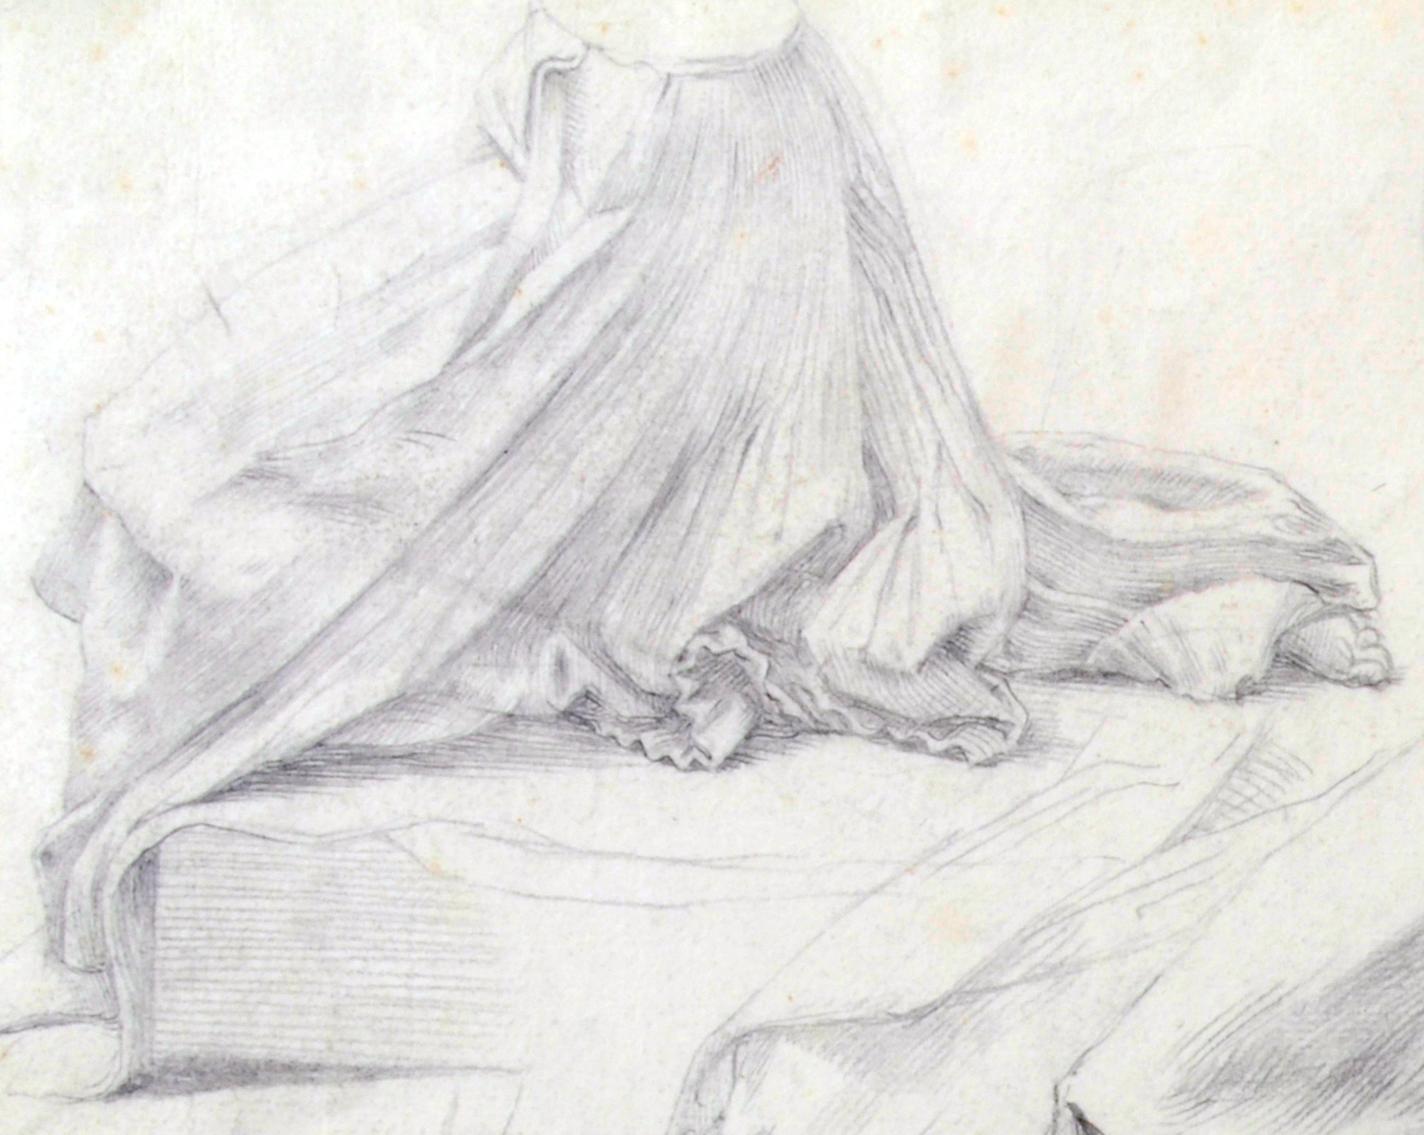 Studies for a historic scene painting
Graphite on paper, c. 1860's
Sheet size: 12 3/8 x 19 inches
Unsigned
Provenance: J S Maas & Co., London (see label)
                      Denys Sutton, London, noted art historian and scholar
                   